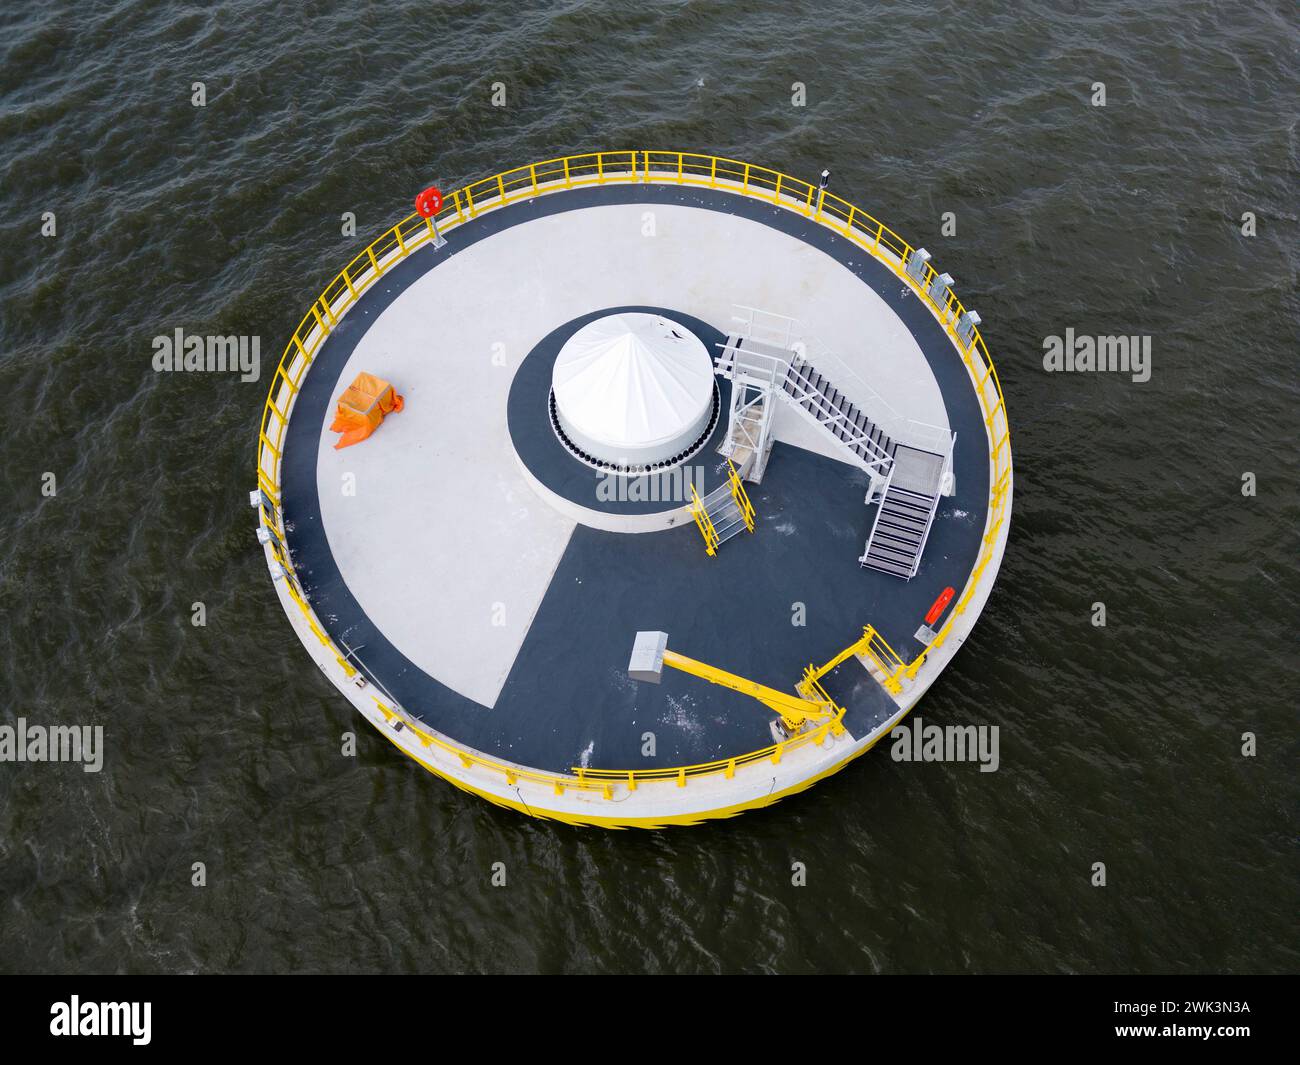 Foundation of a windturbine in shallow water, Ijsselmeer, The Netherlands Stock Photo